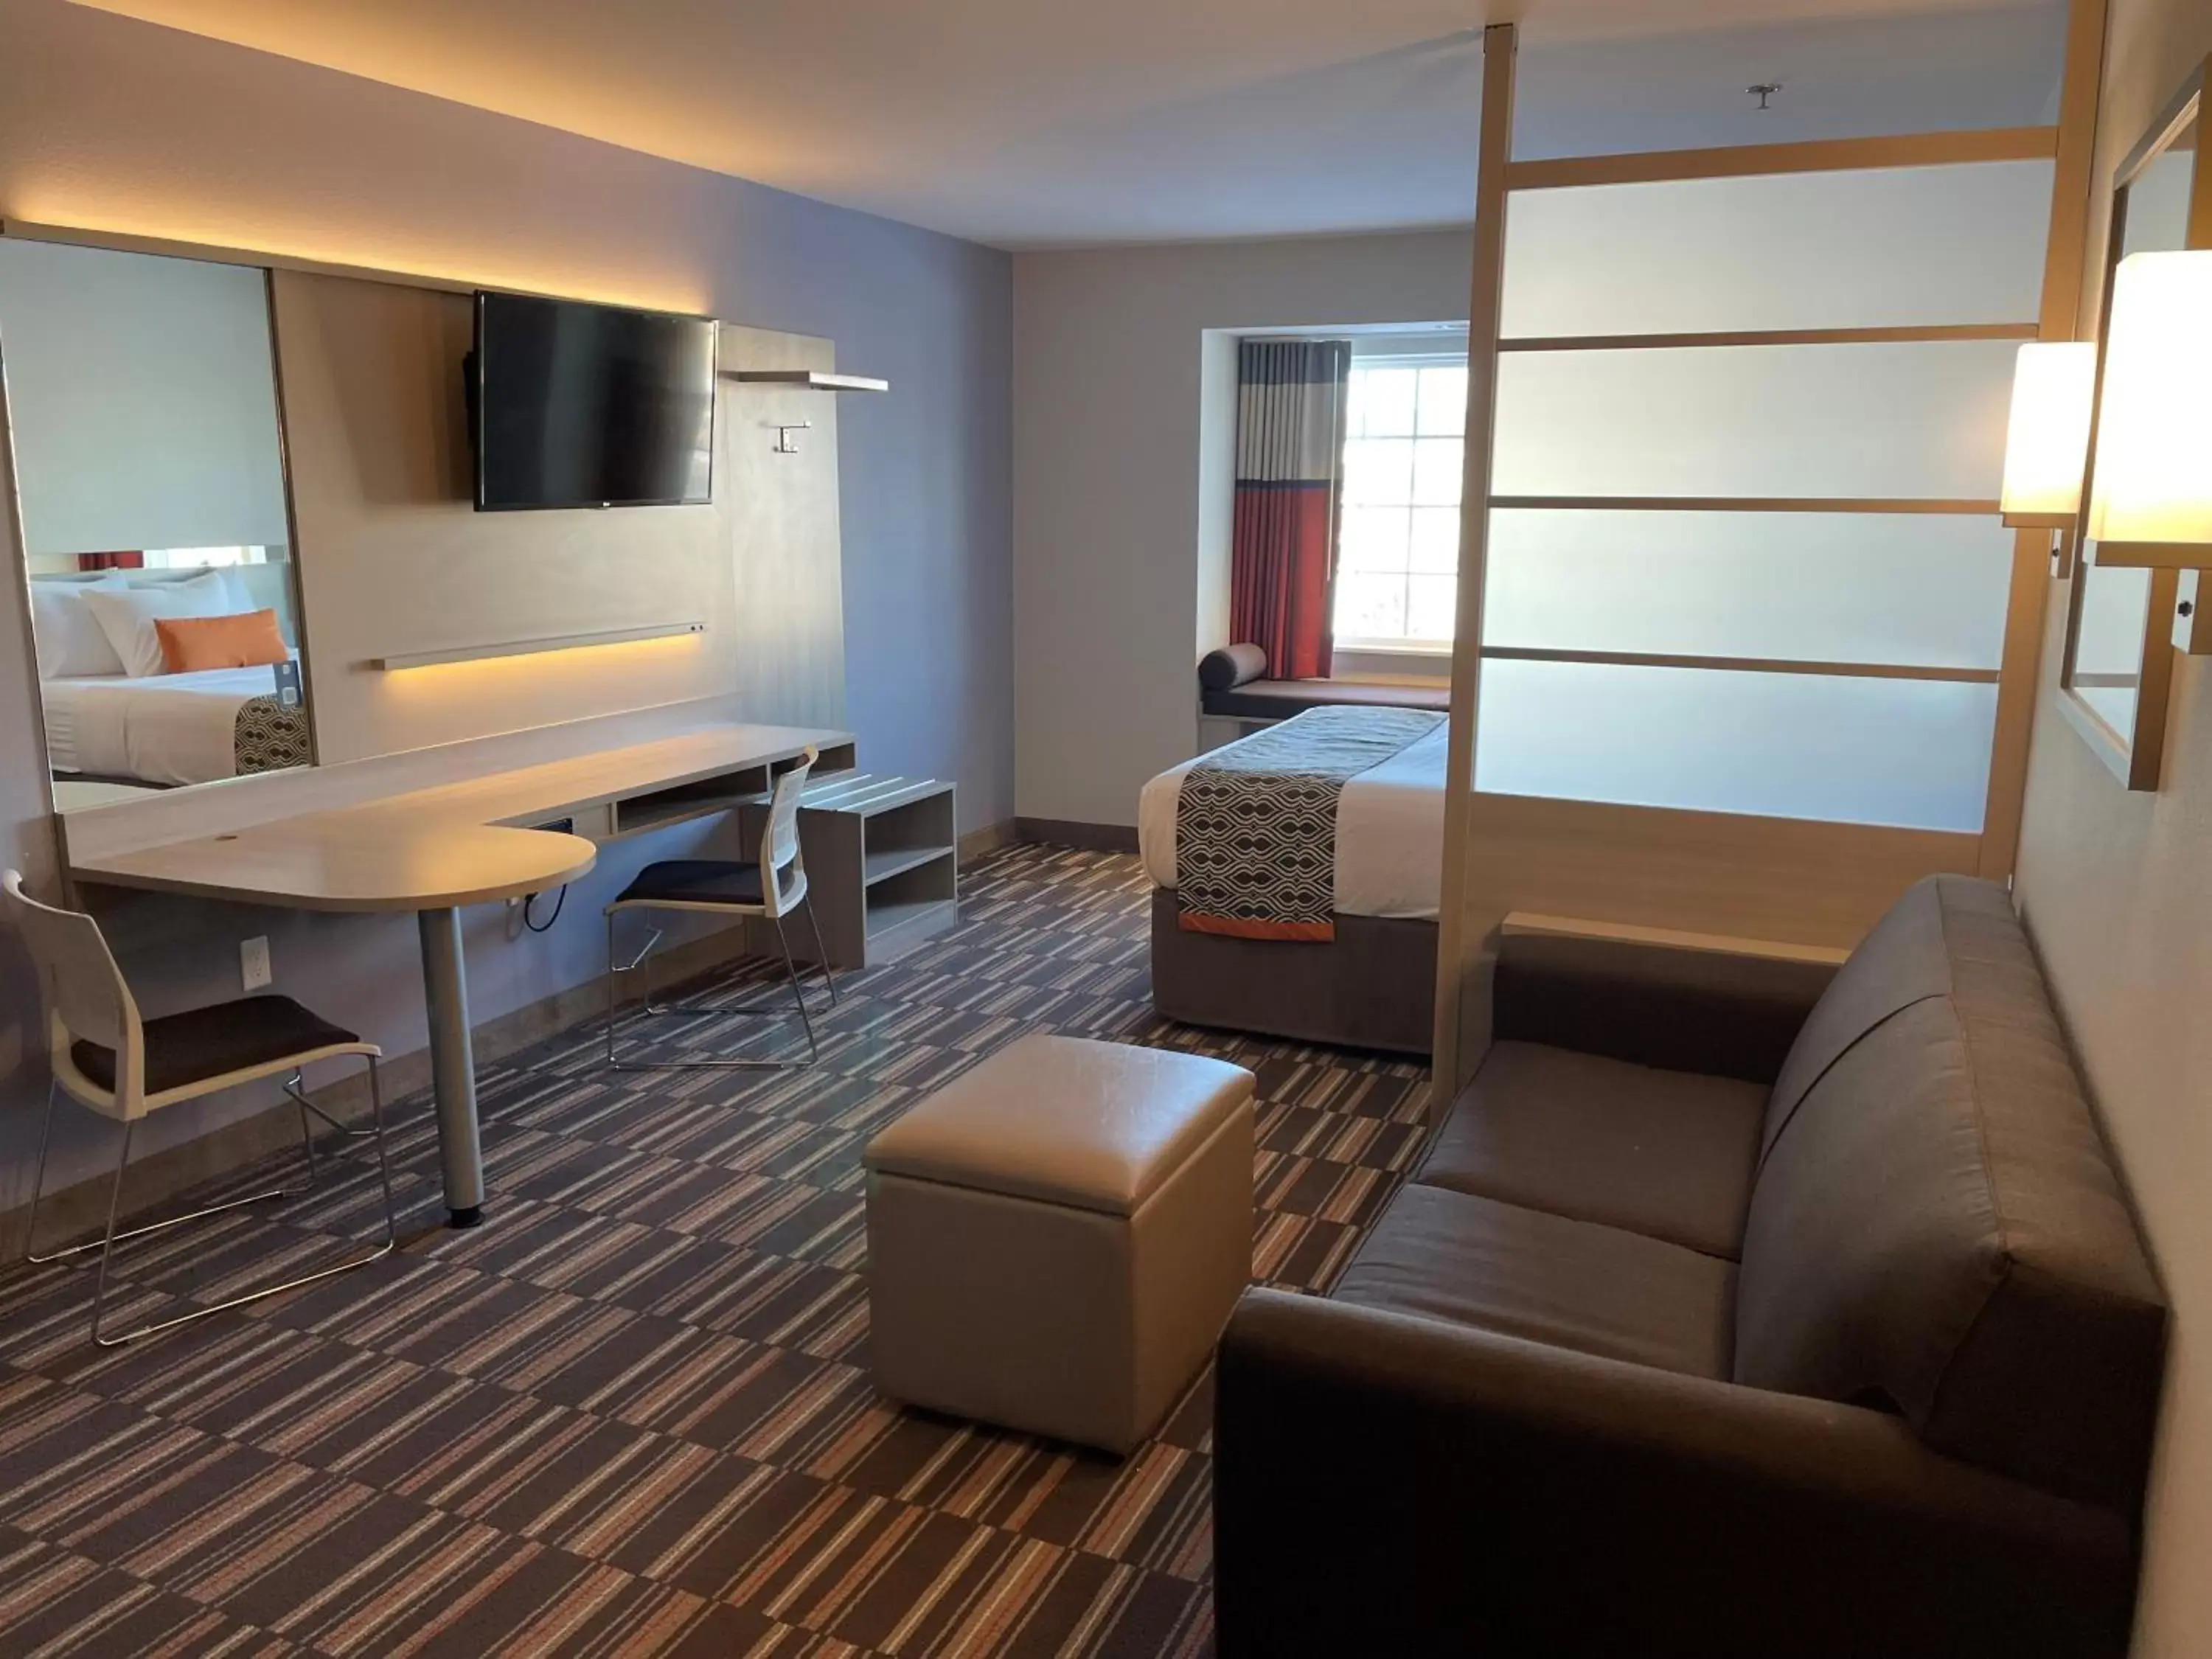 Queen Studio Suite - Non-Smoking in Microtel Inn & Suites by Wyndham Rochester South Mayo Clinic